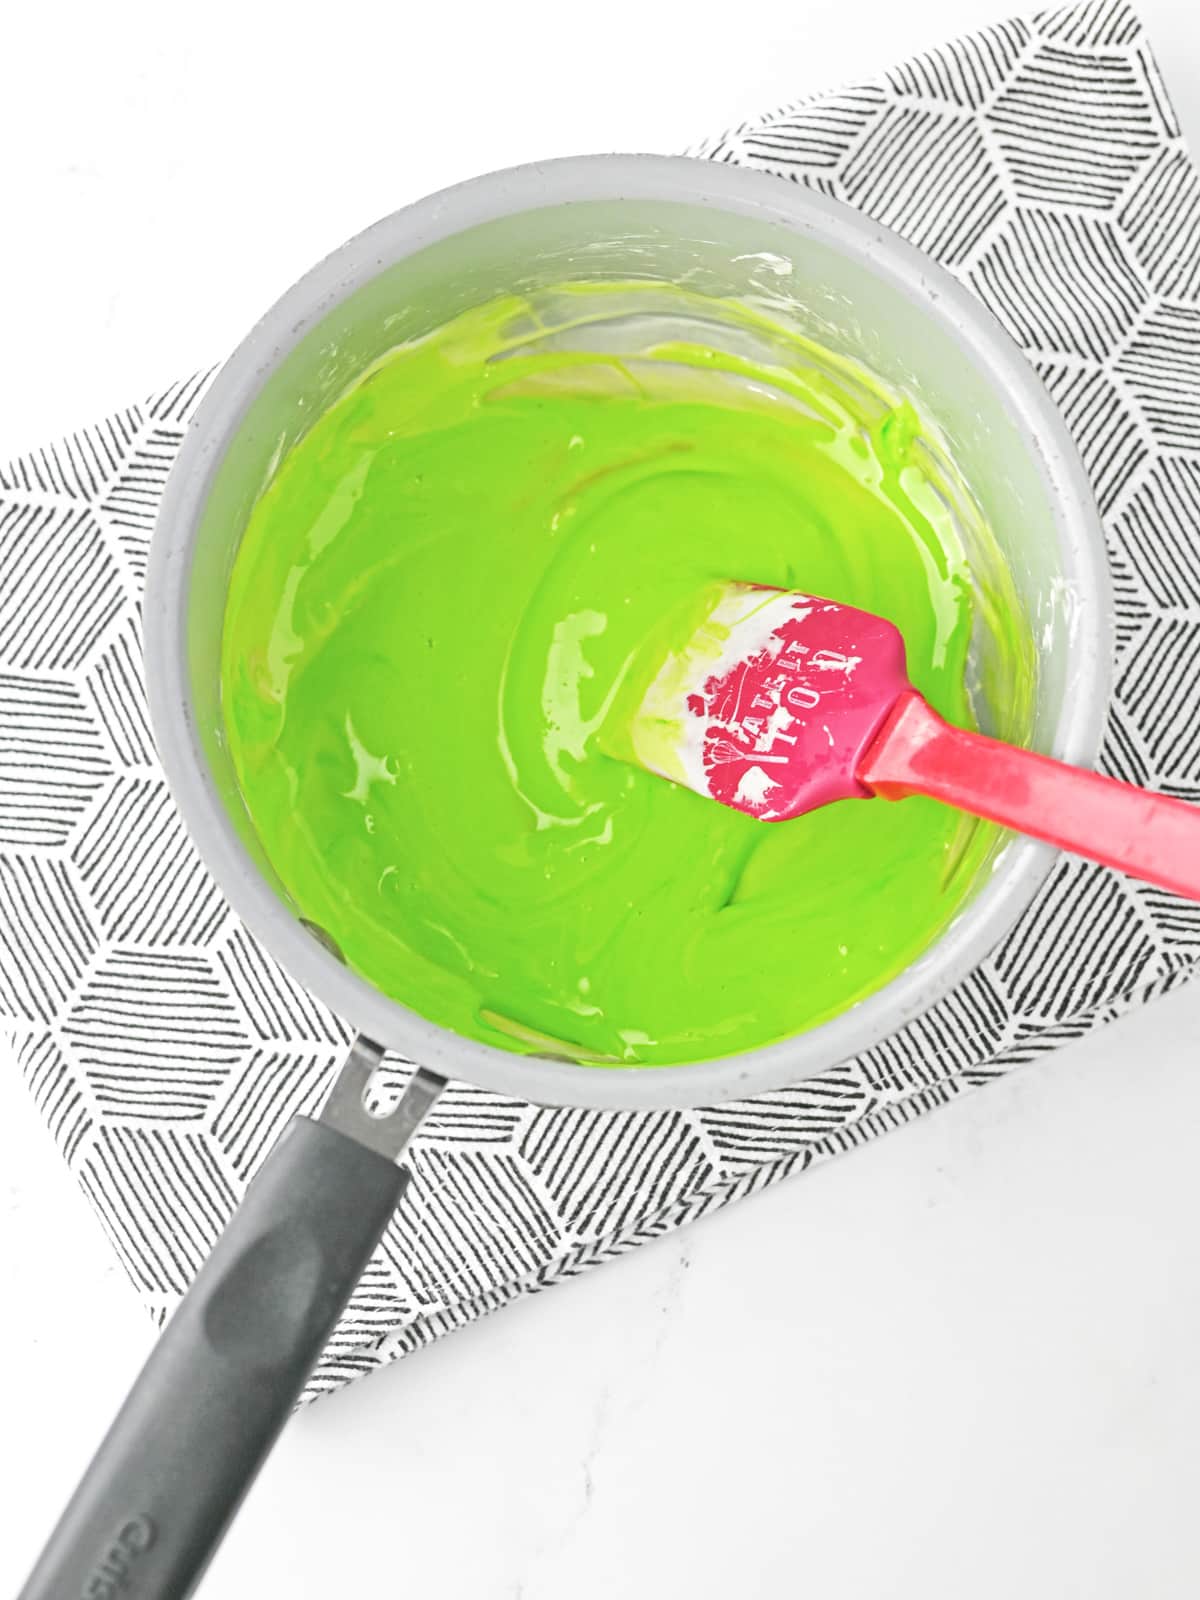 add green food coloring to melted marshmallows